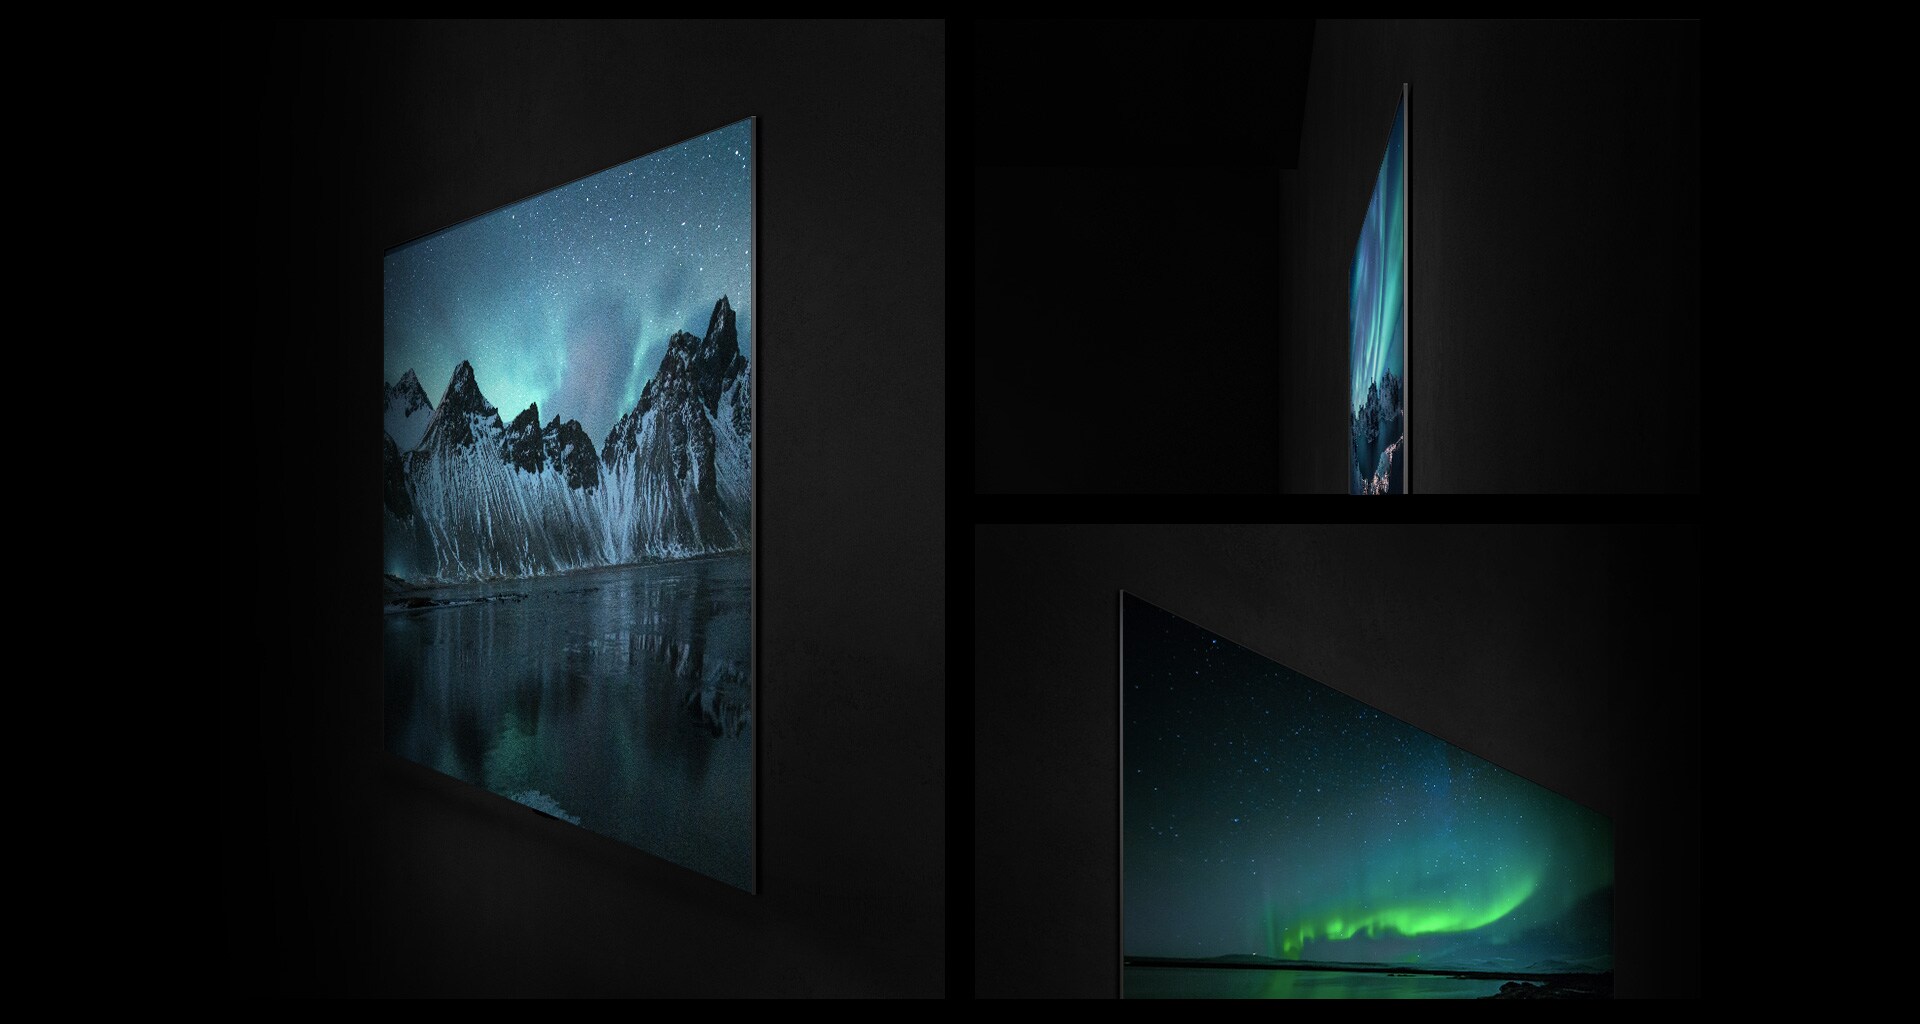 A wall-mounted LG OLED television is shown from various angles emphasizing the Gallery Design and flat back